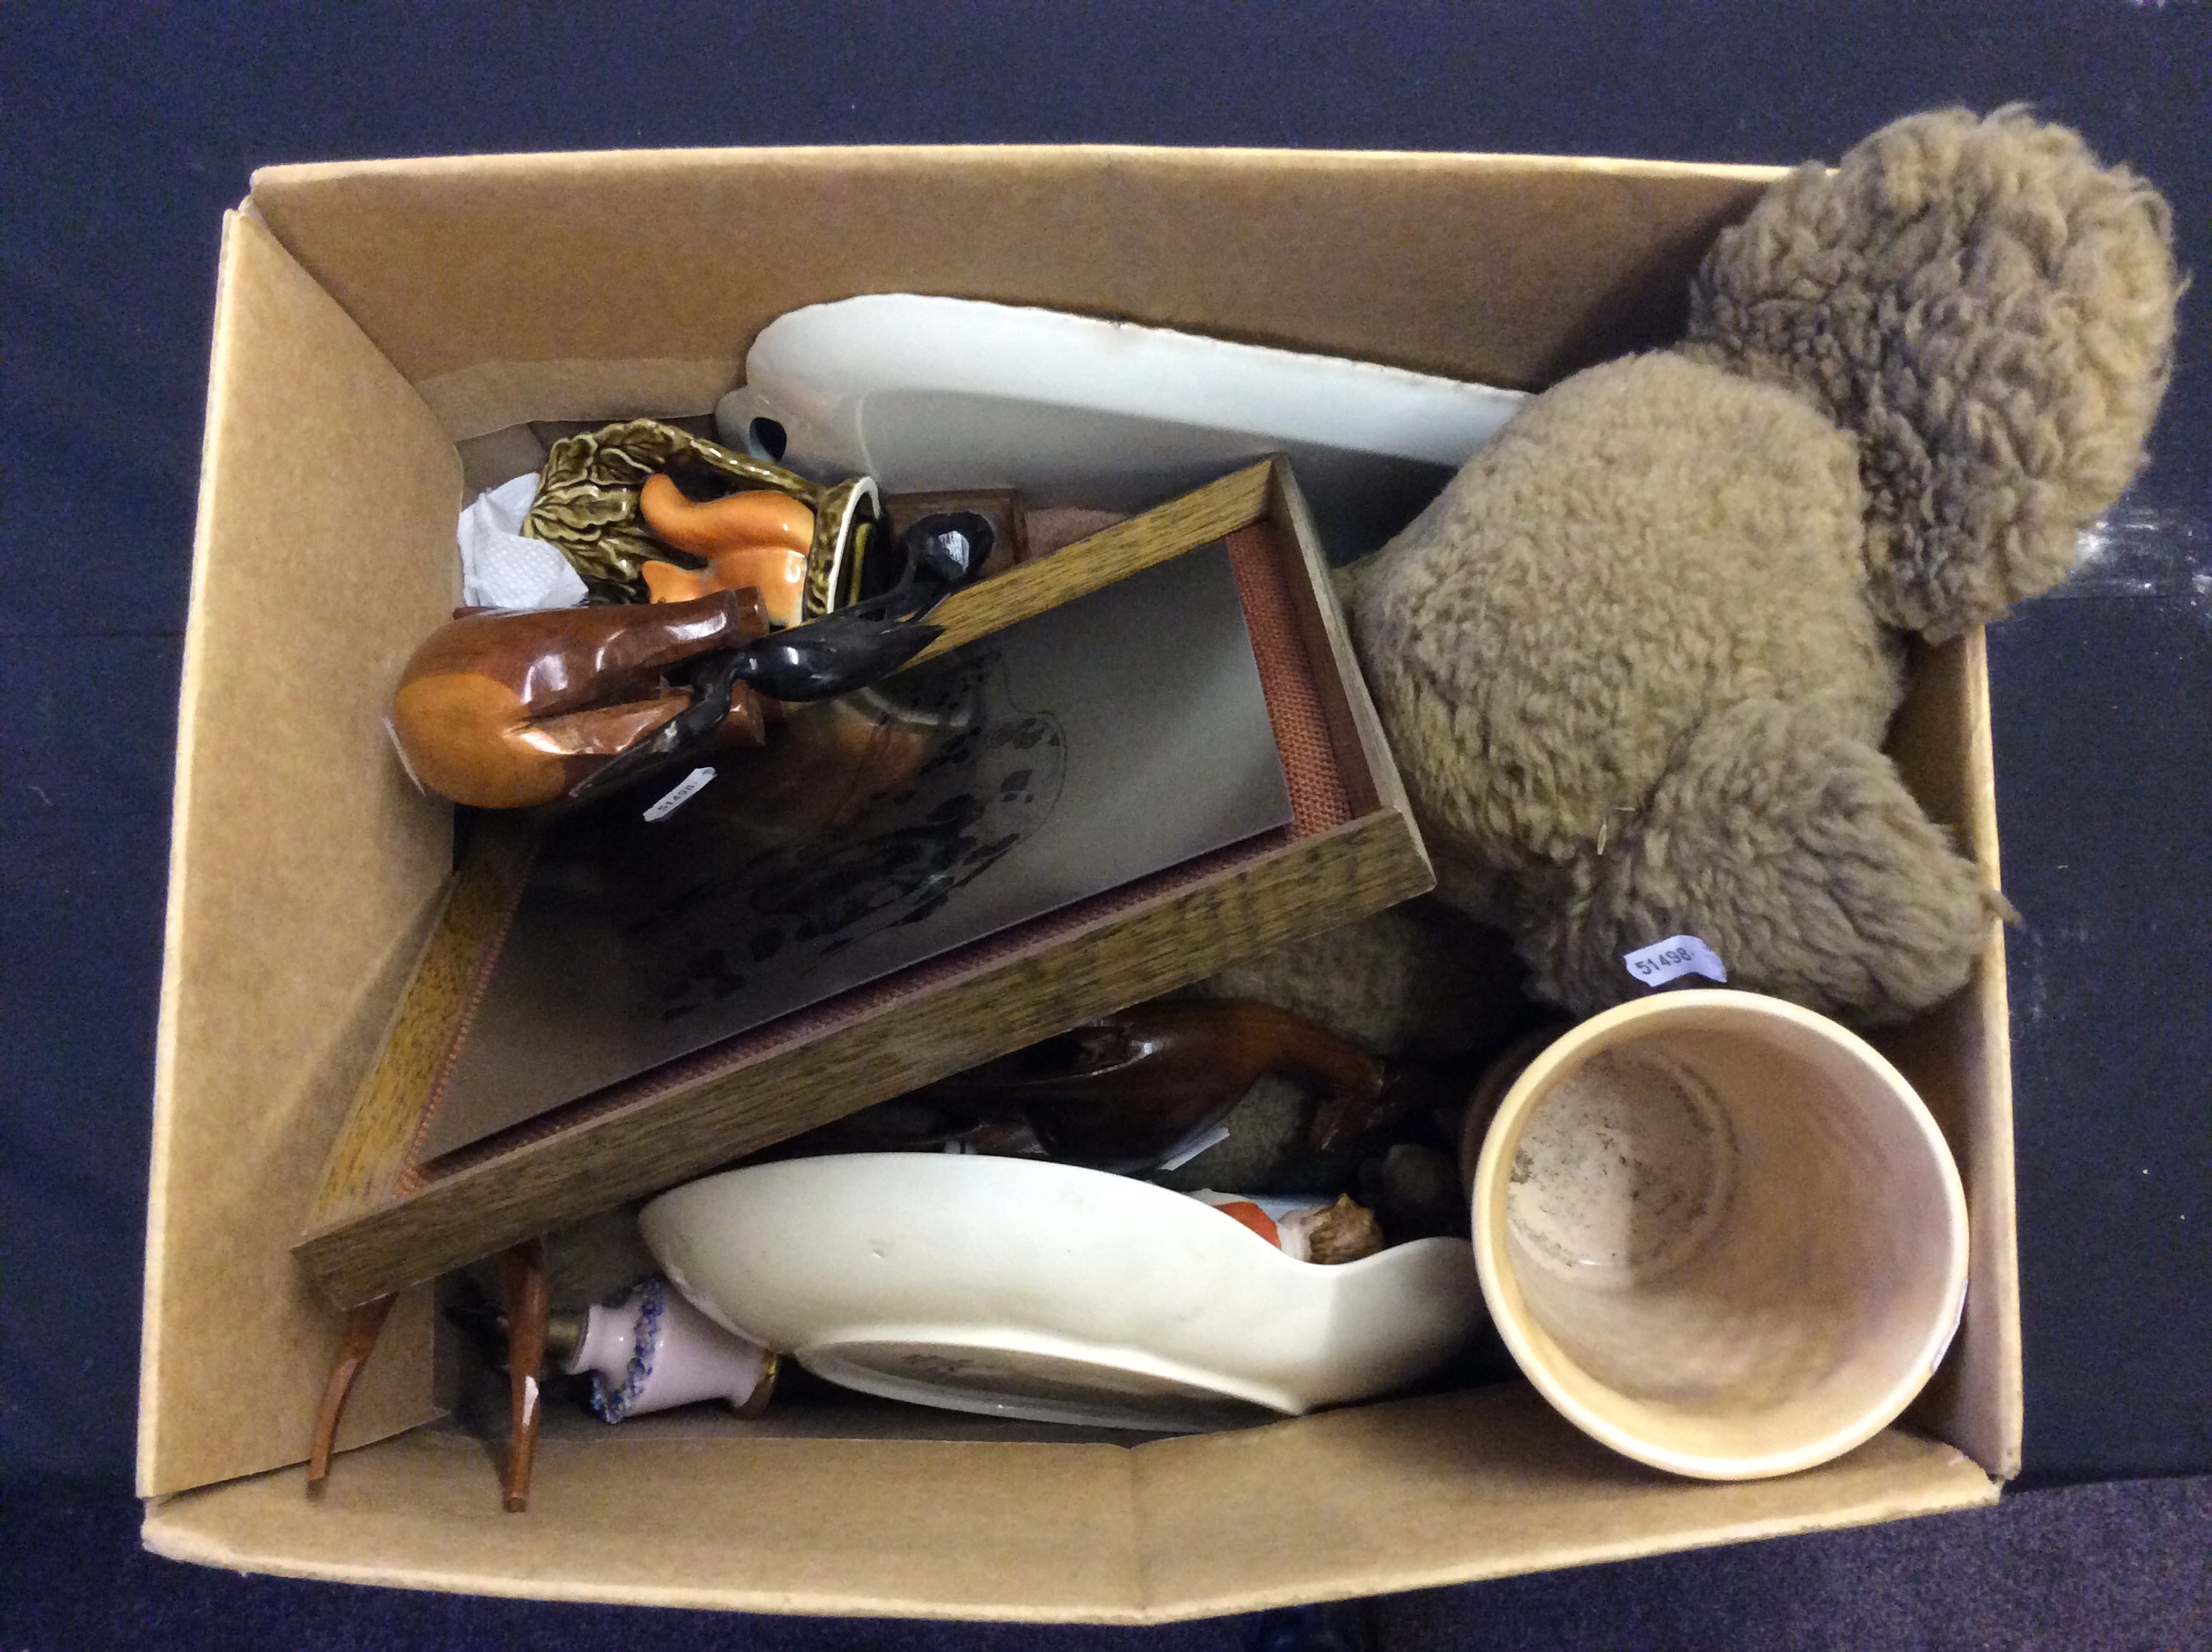 A box of various household items including a teddy bear, a ceramic vase and dish and a set of wooden